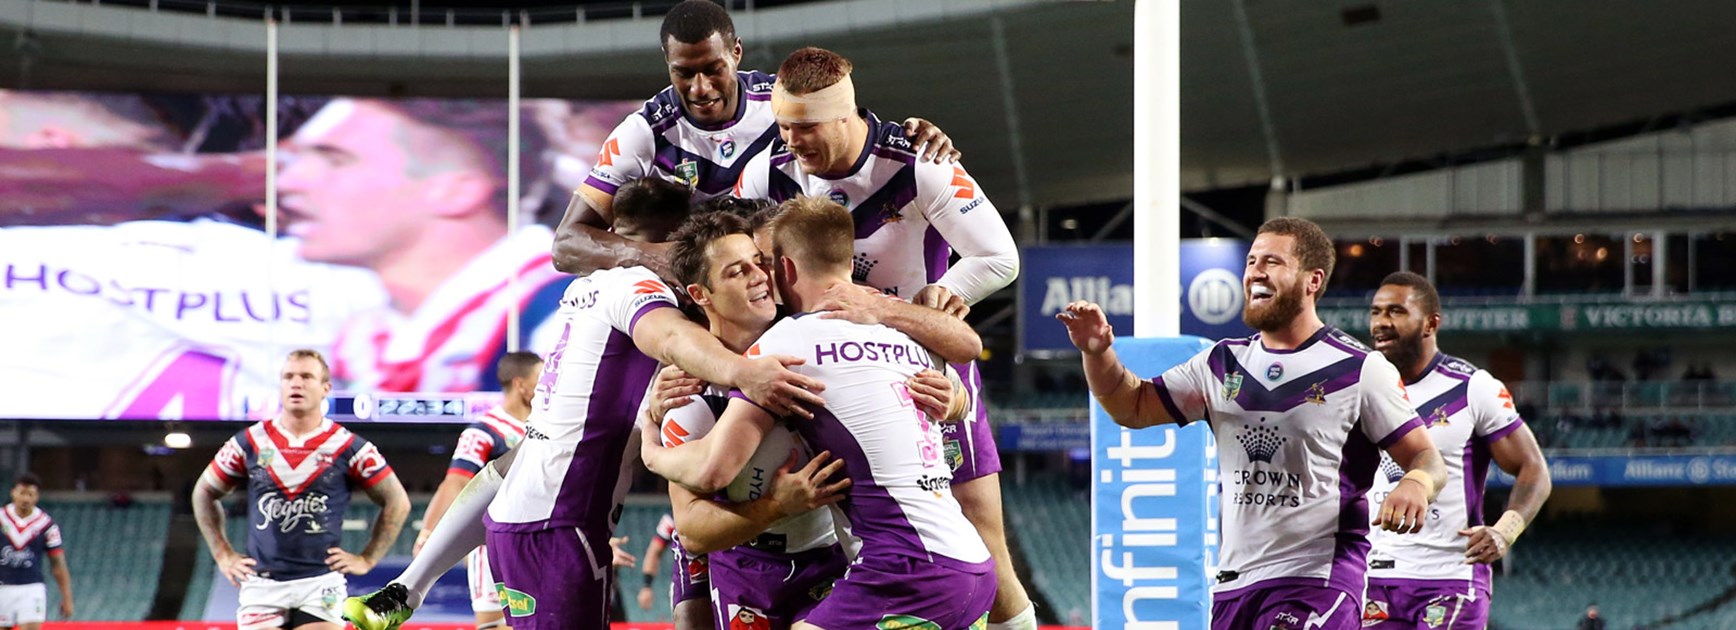 Storm players celebrate during their monster win over the Roosters.